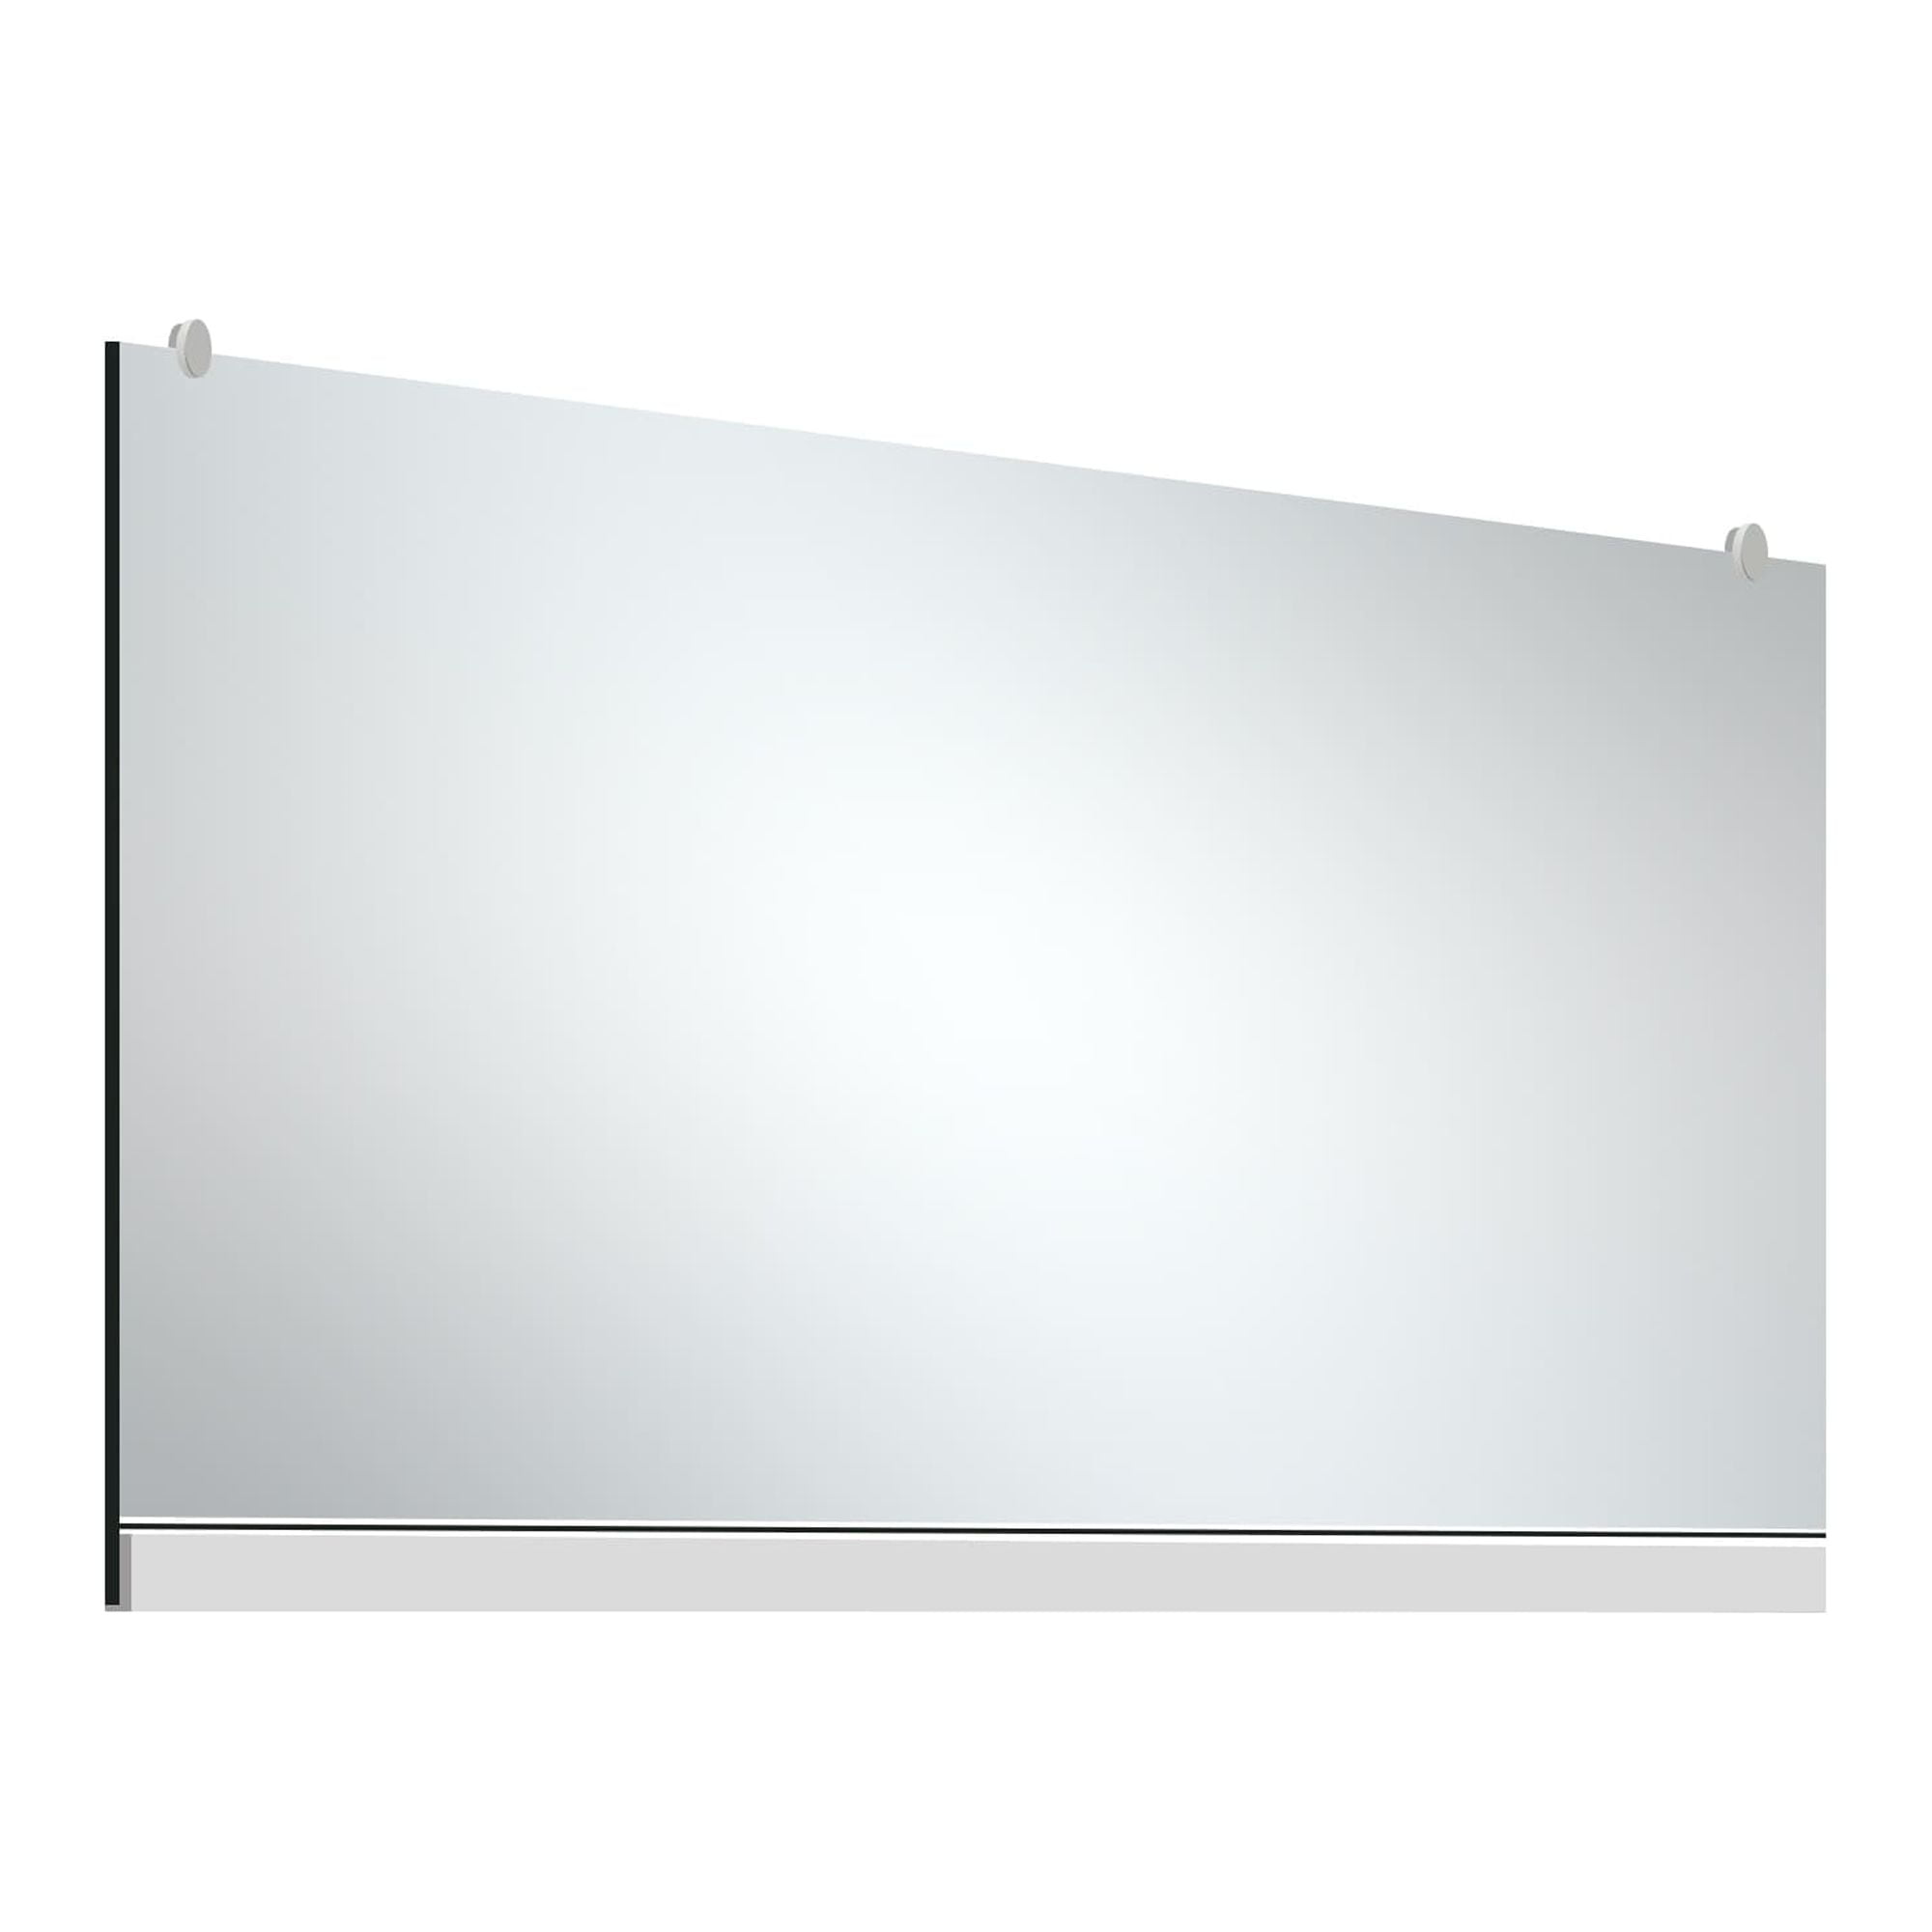 H-A Hans & Alice Wall Mounted Activity Mirror for Home Gym, Workout Mirror Home Gym and Commercial Use 47.2 x 31.5 (Single)